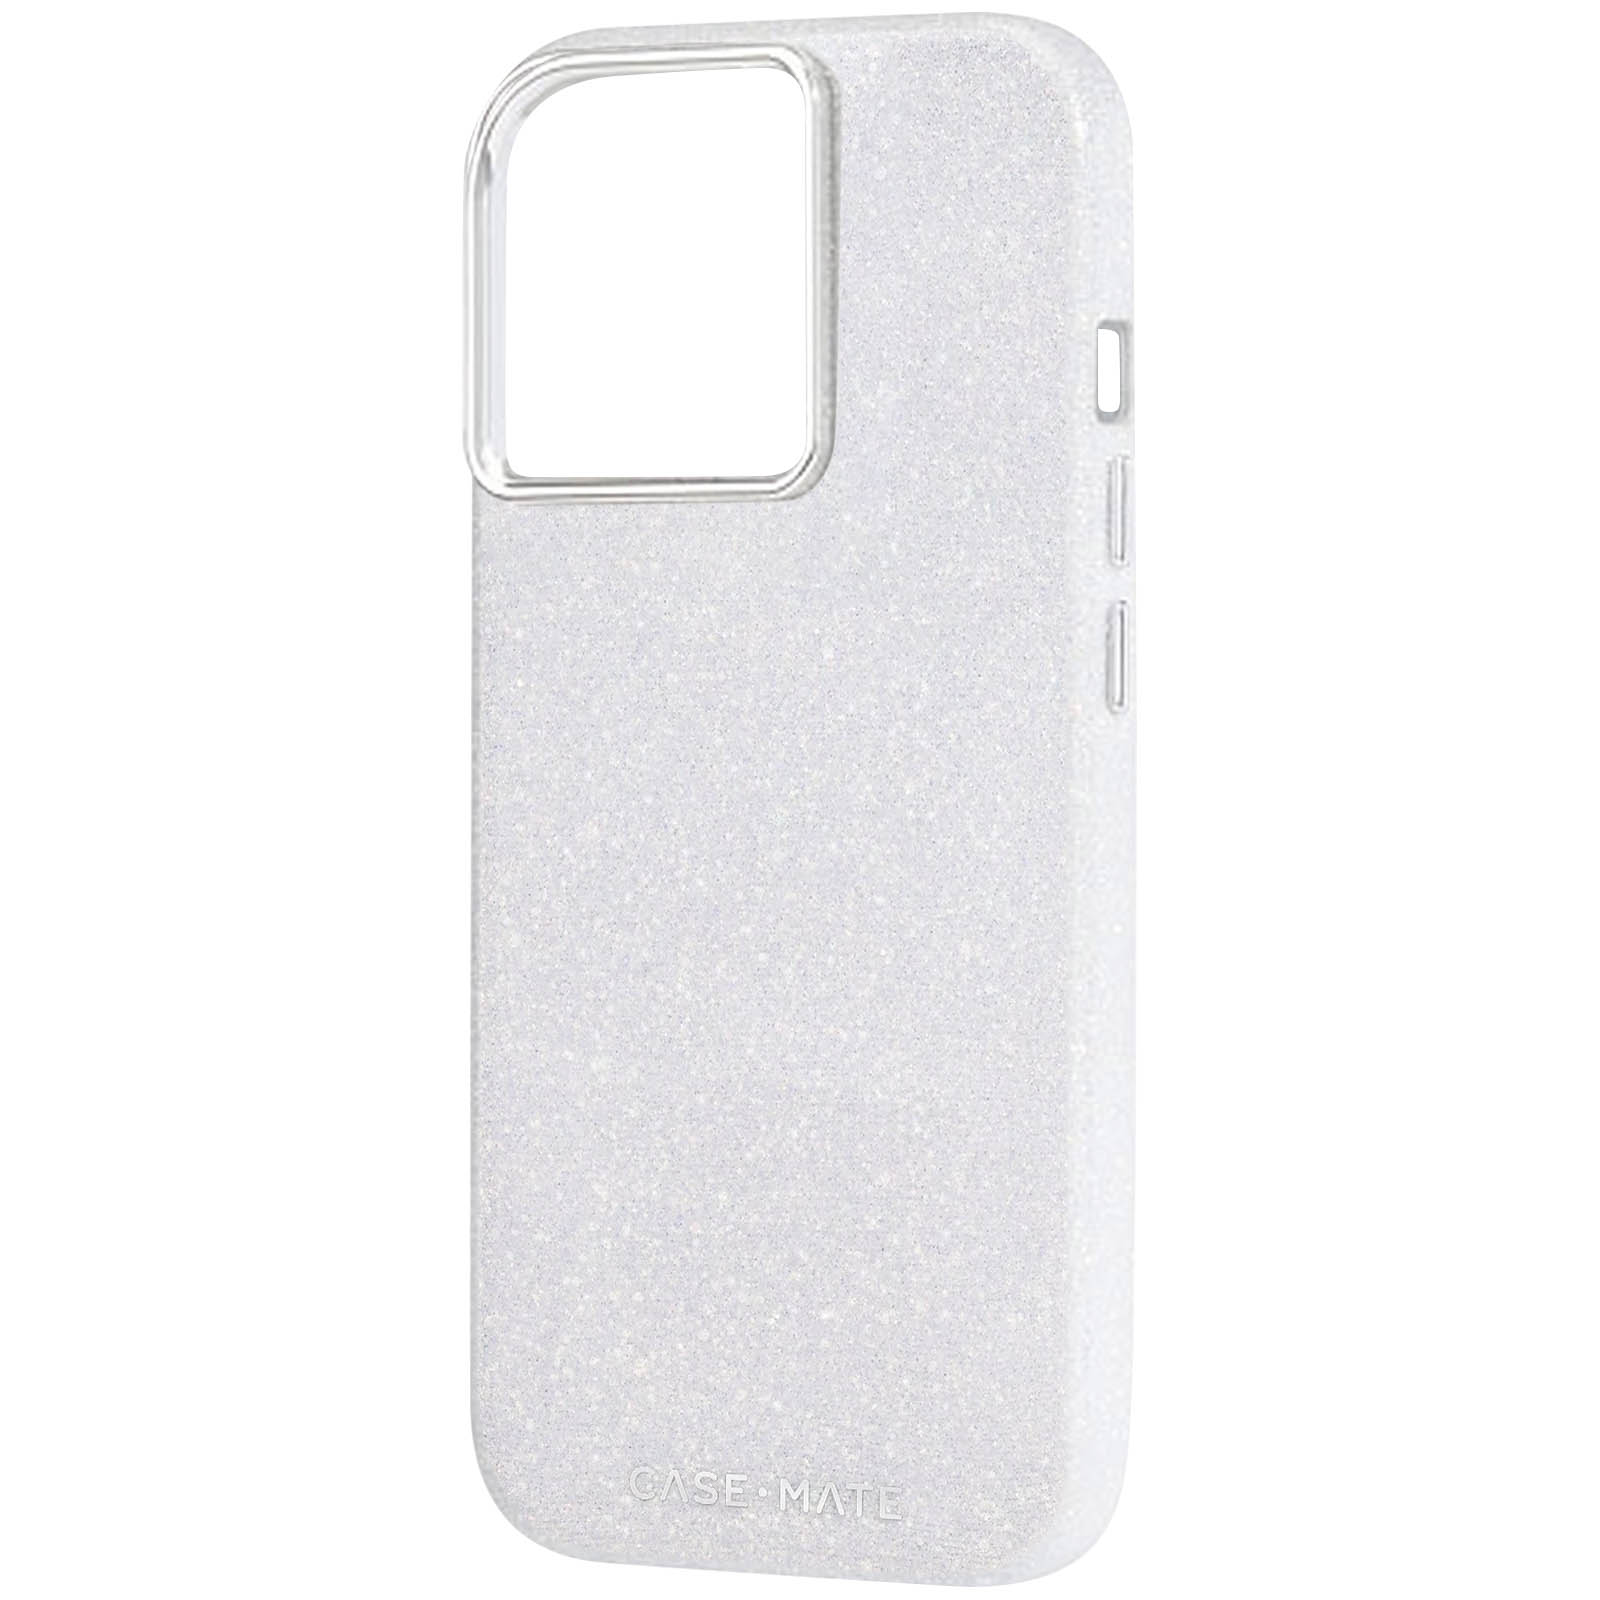 Series, Backcover, Pro iPhone Max, Glitter 15 Silber CASE-MATE Apple,